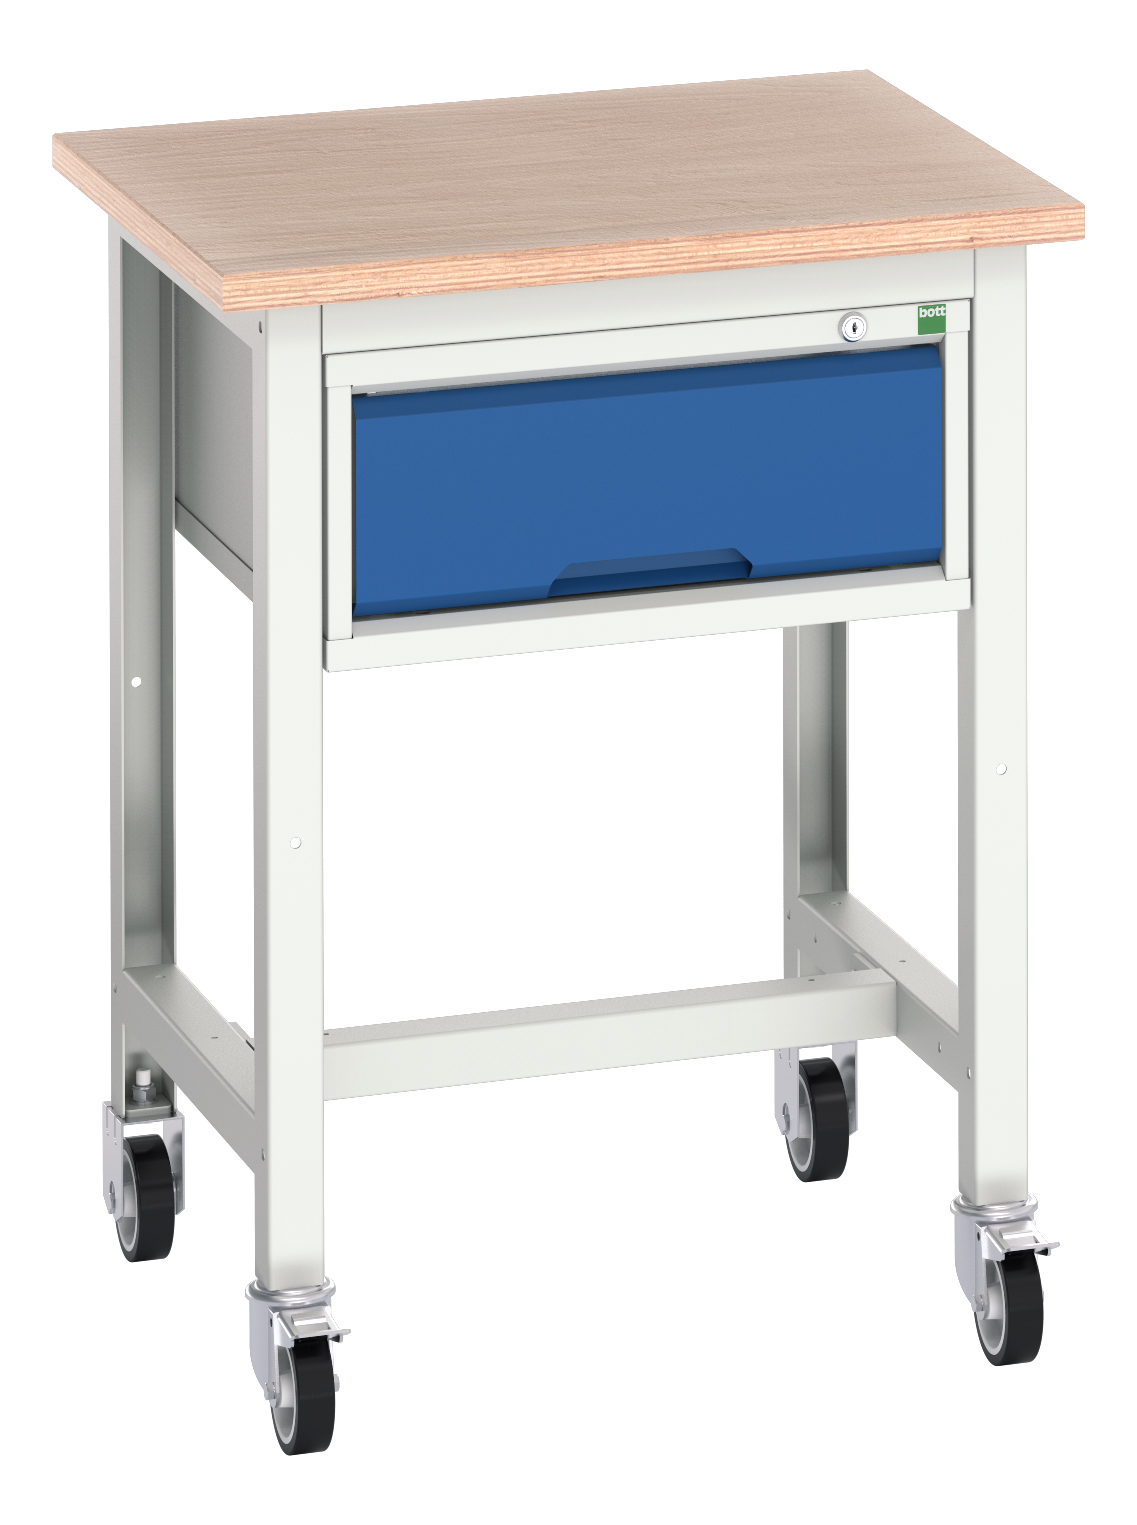 Bott Verso Mobile Workstand With 1 Drawer Cabinet - 16922200.11